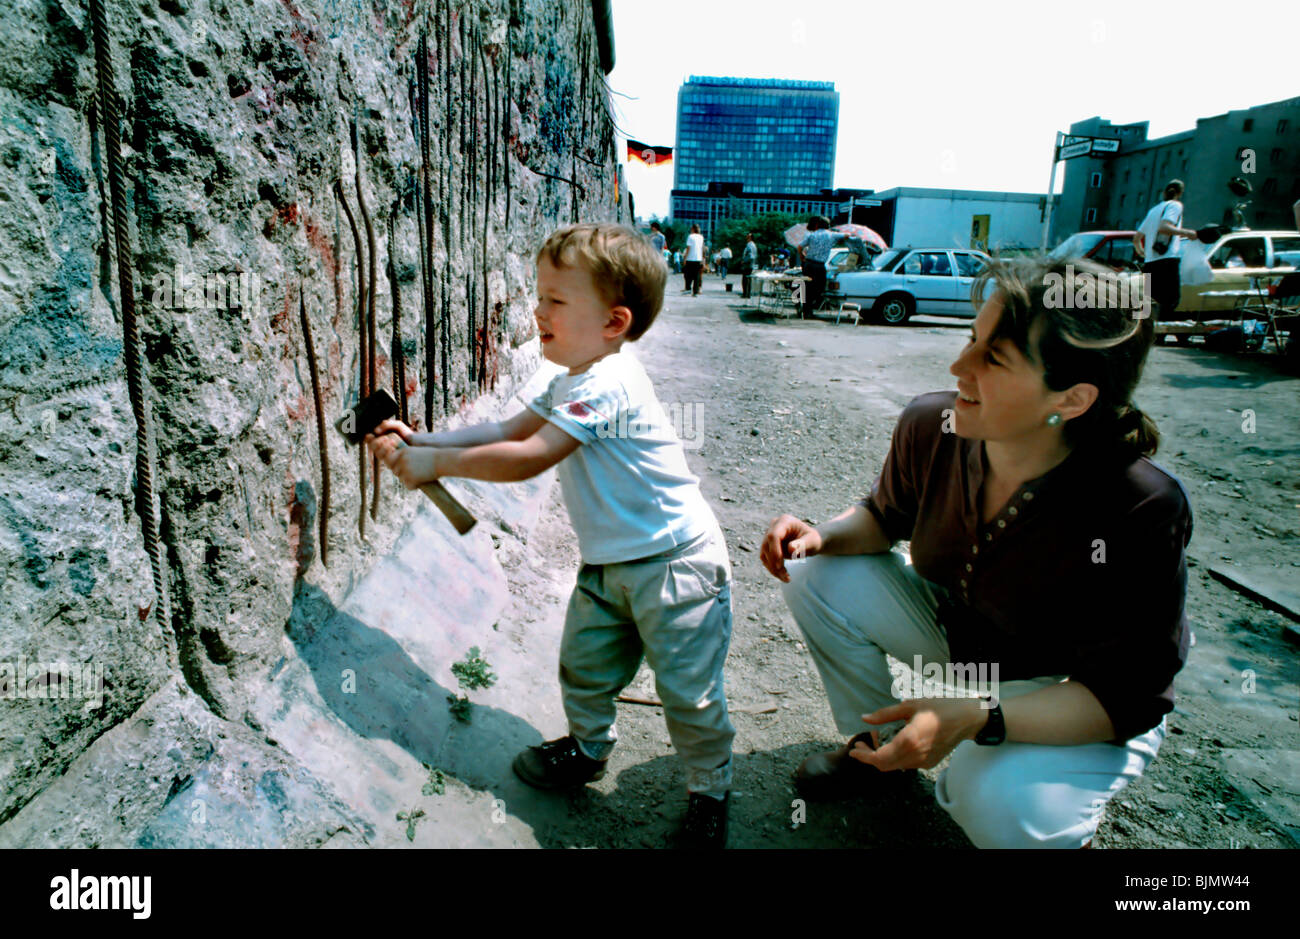 Berlin, Germany, Mother & Child Chipping at 'Berlin Wall', 1990, Vintage Photo, 1990s women Stock Photo